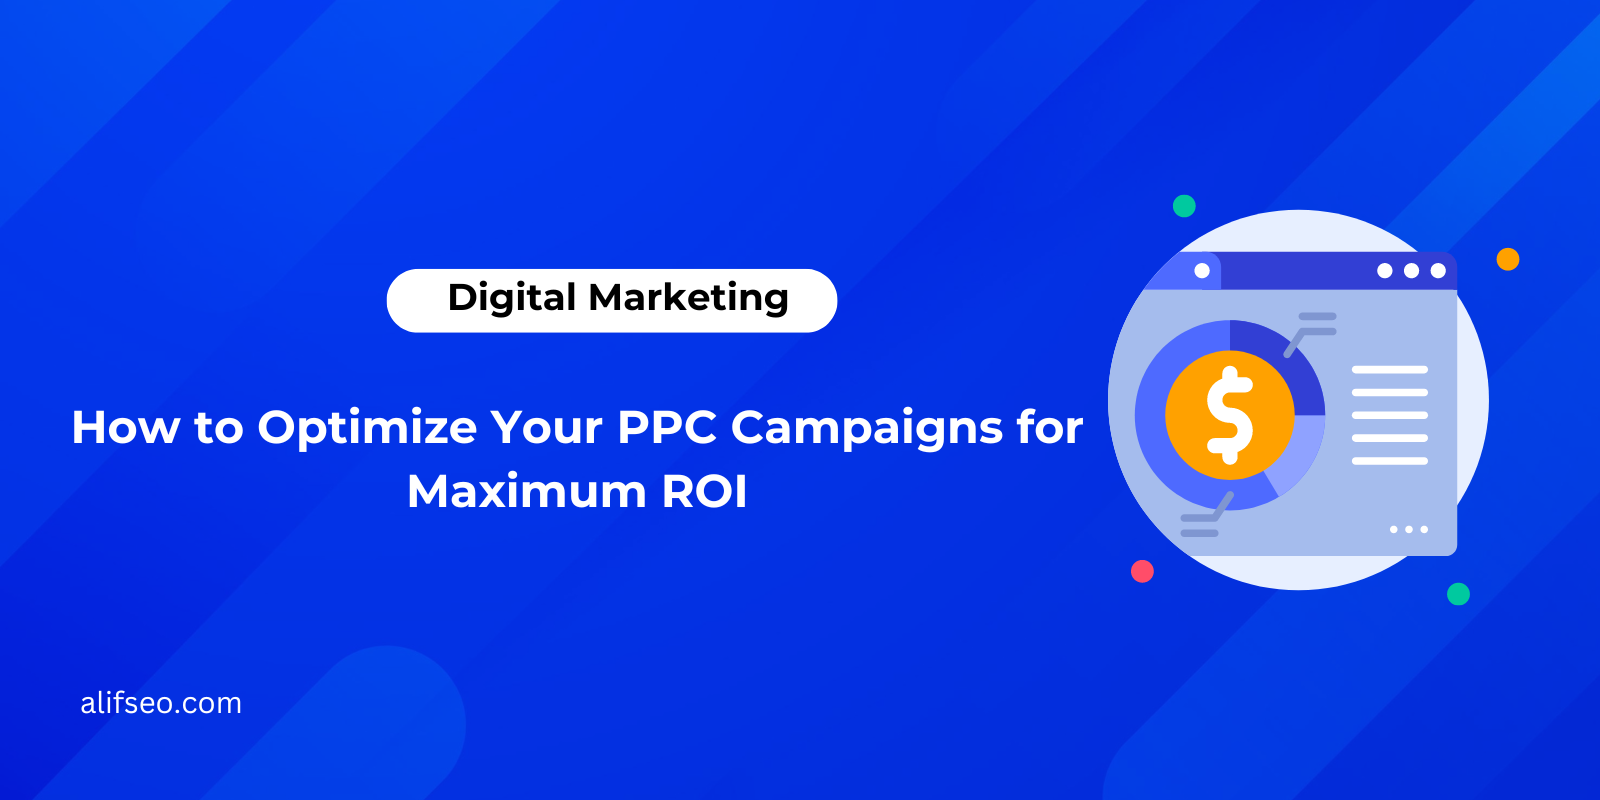 How to Optimize Your PPC Campaigns for Maximum ROI